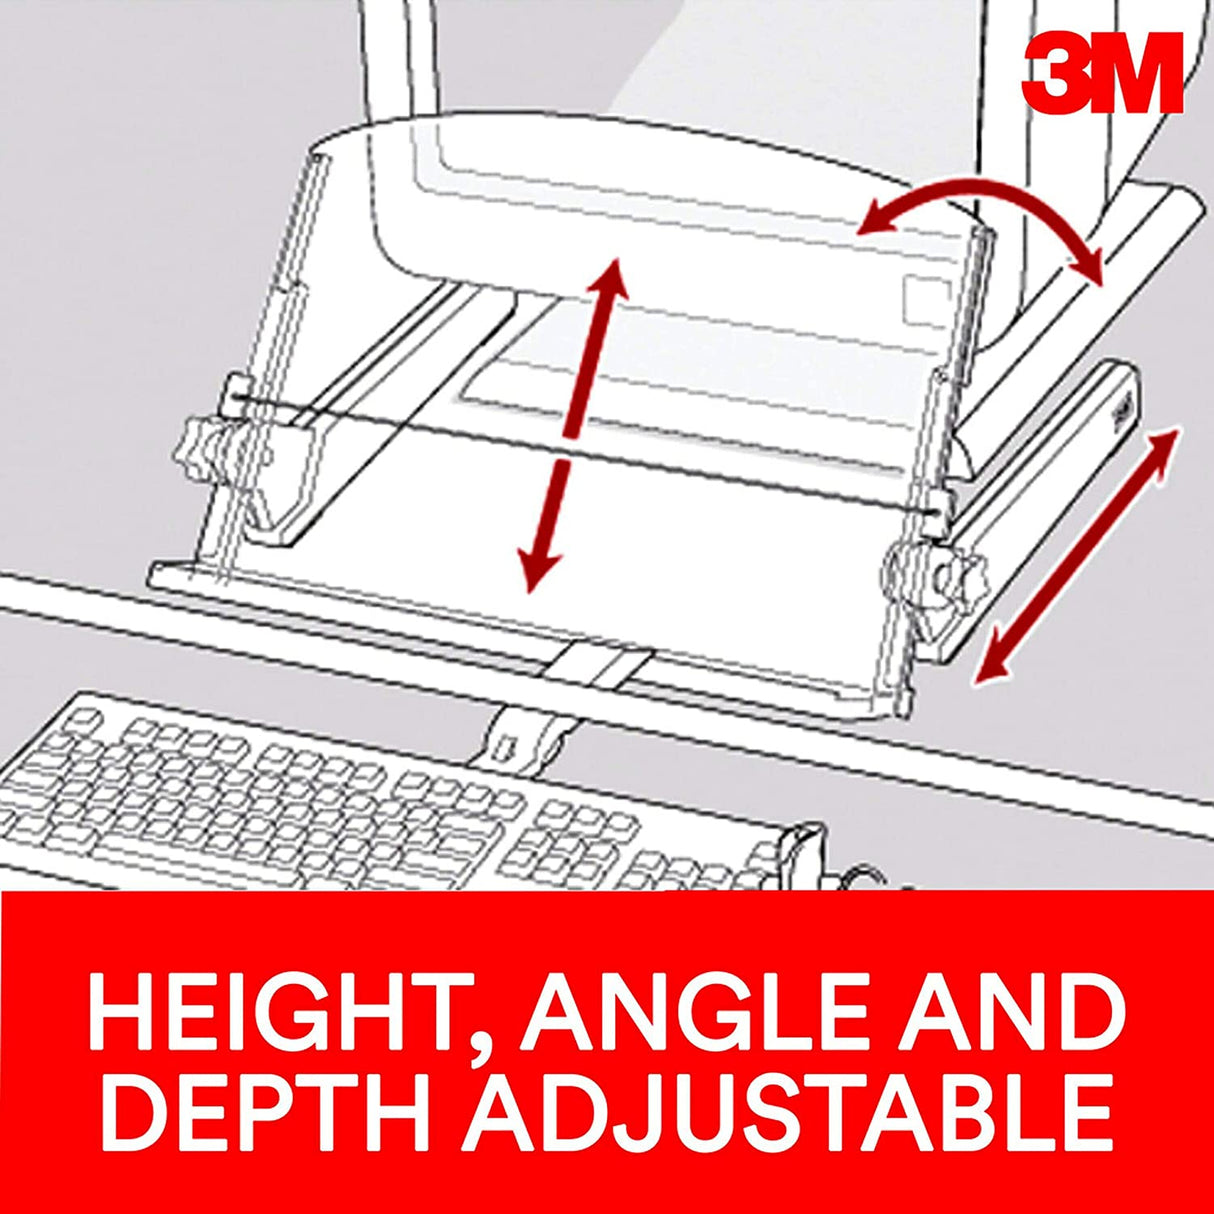 3M Adjustable Document Copy Holder, In-line with Monitor Minimizing Head and Neck Movement, 300 Sheet Capacity Holds Sheets to Books, Elastic Line Guide Keeps Pages Open, 18" Wide, Black (DH640),Black/Clear - Dealtargets.com